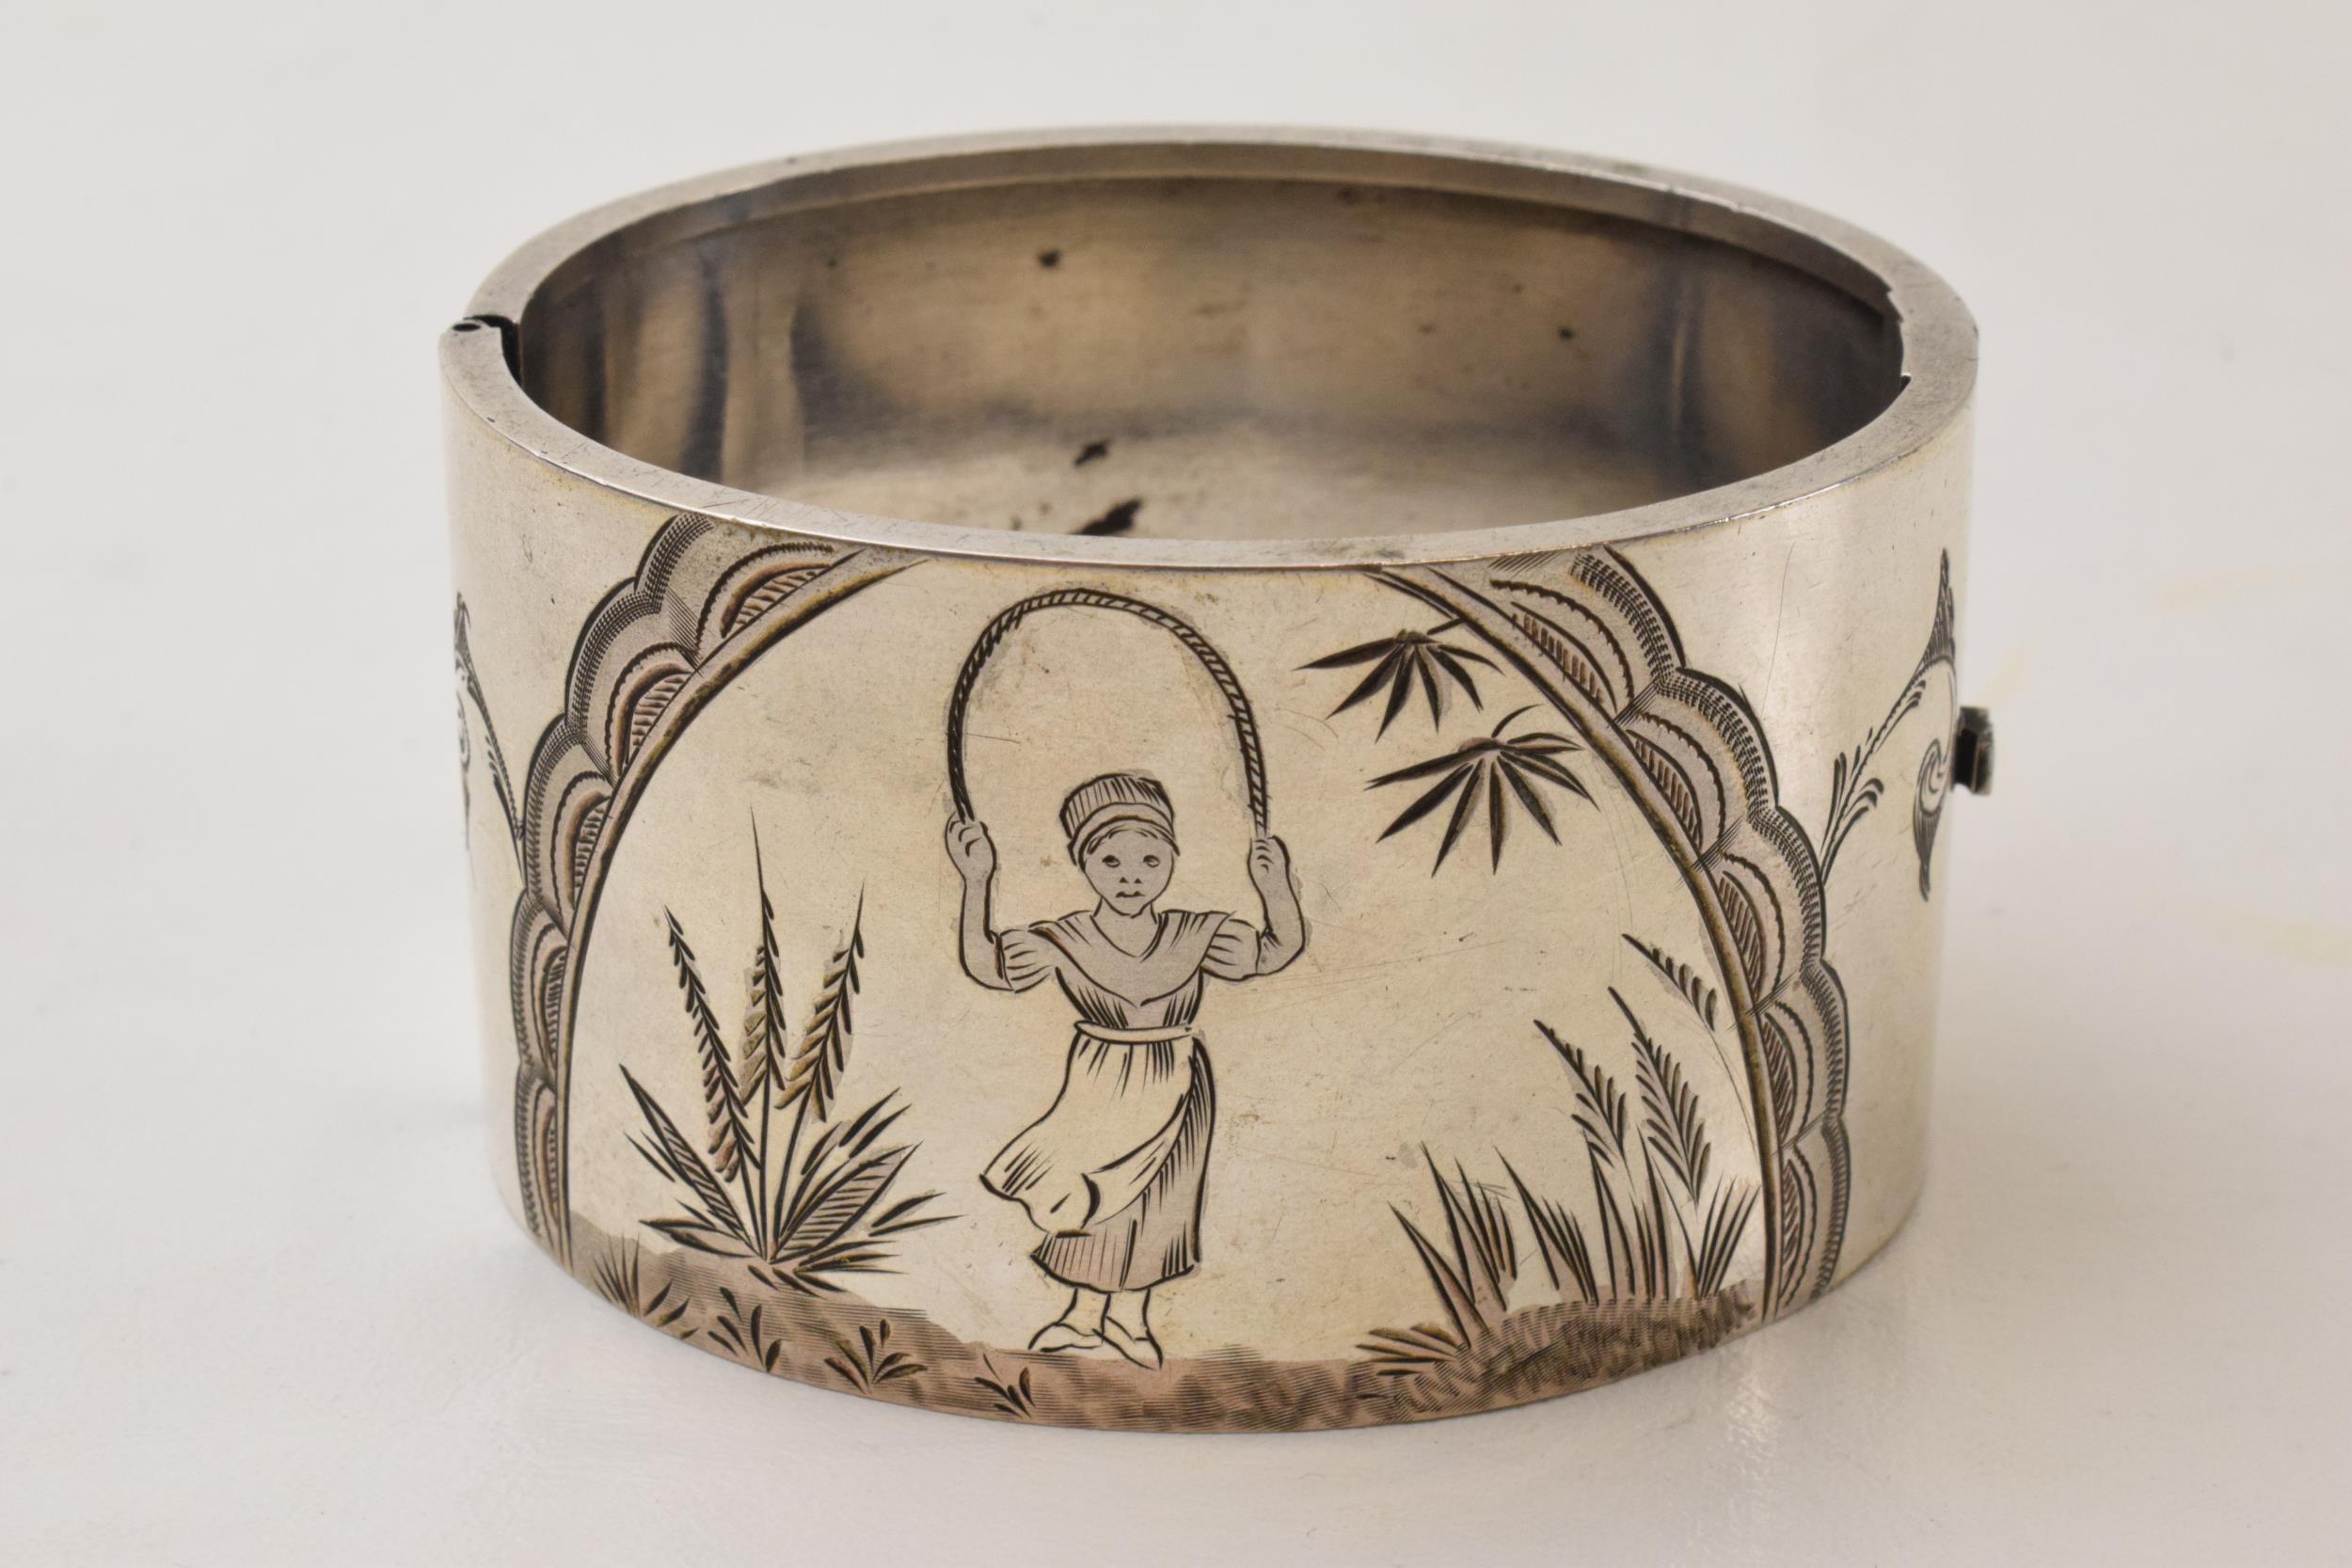 Silver engraved wide bangle with a girl skipping amongst foliage, 47.3 grams. No hallmarks but tests